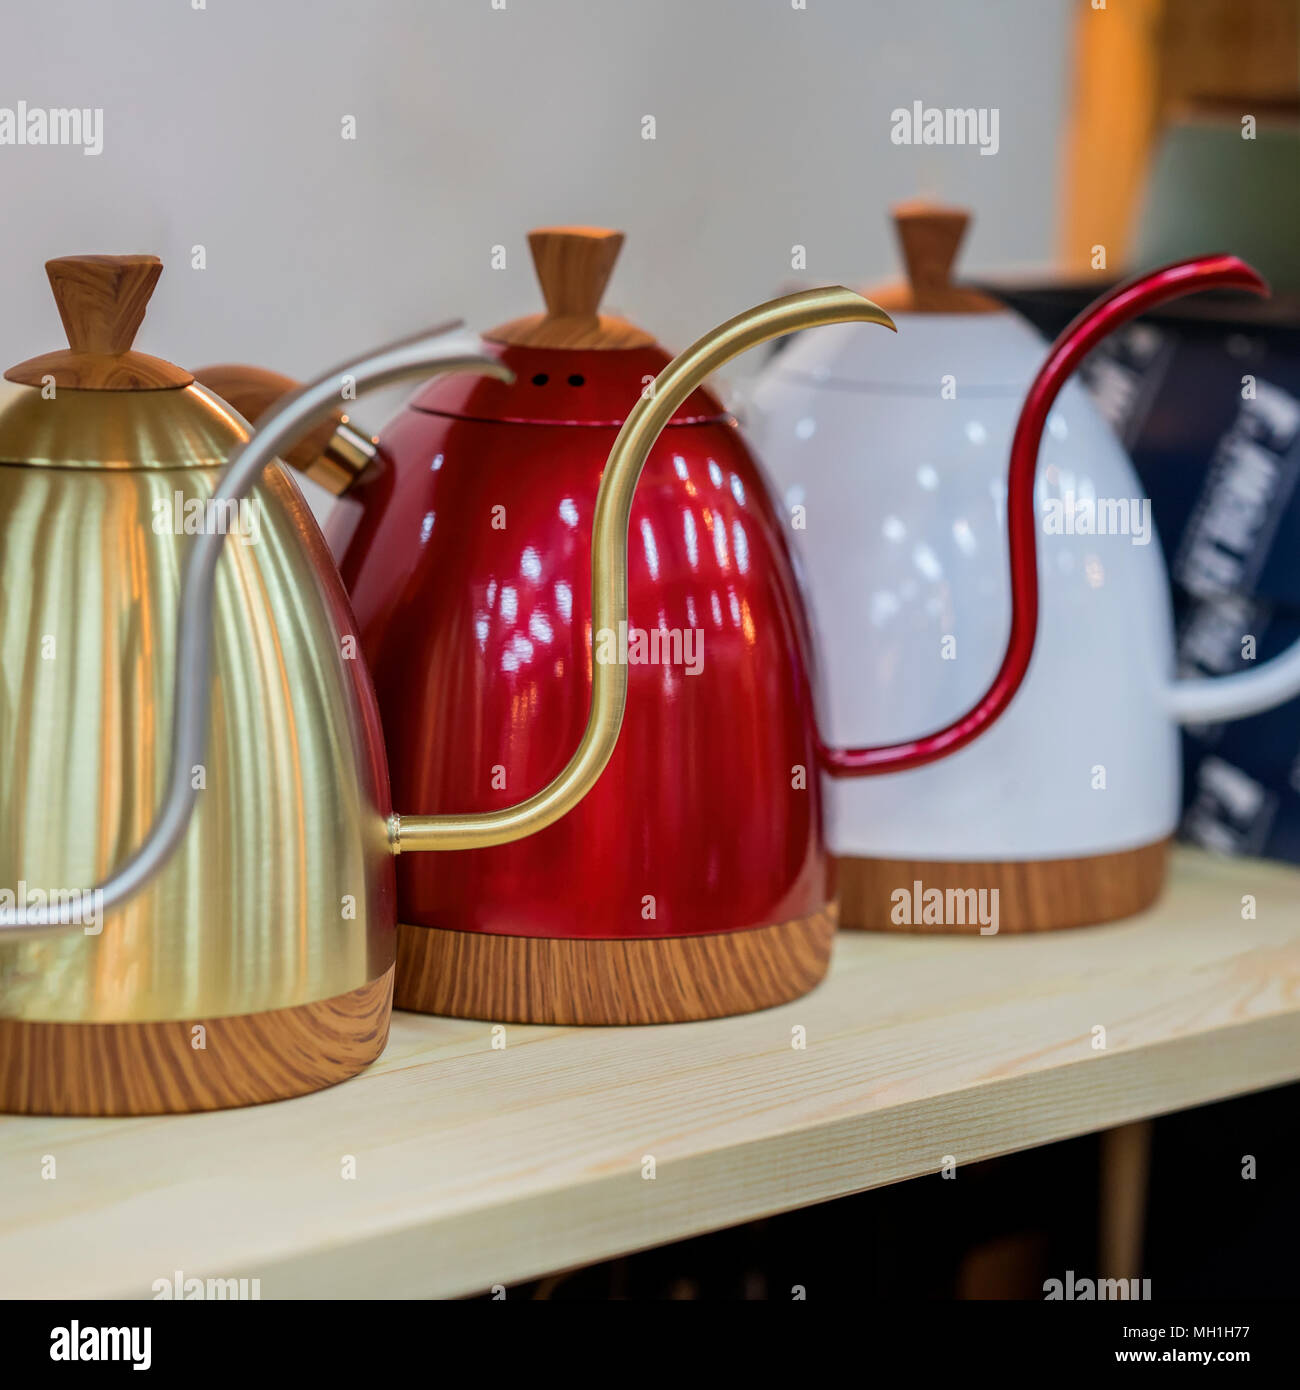 https://c8.alamy.com/comp/MH1H77/modern-metallic-colorful-teapots-for-filtered-coffee-cafe-shop-MH1H77.jpg